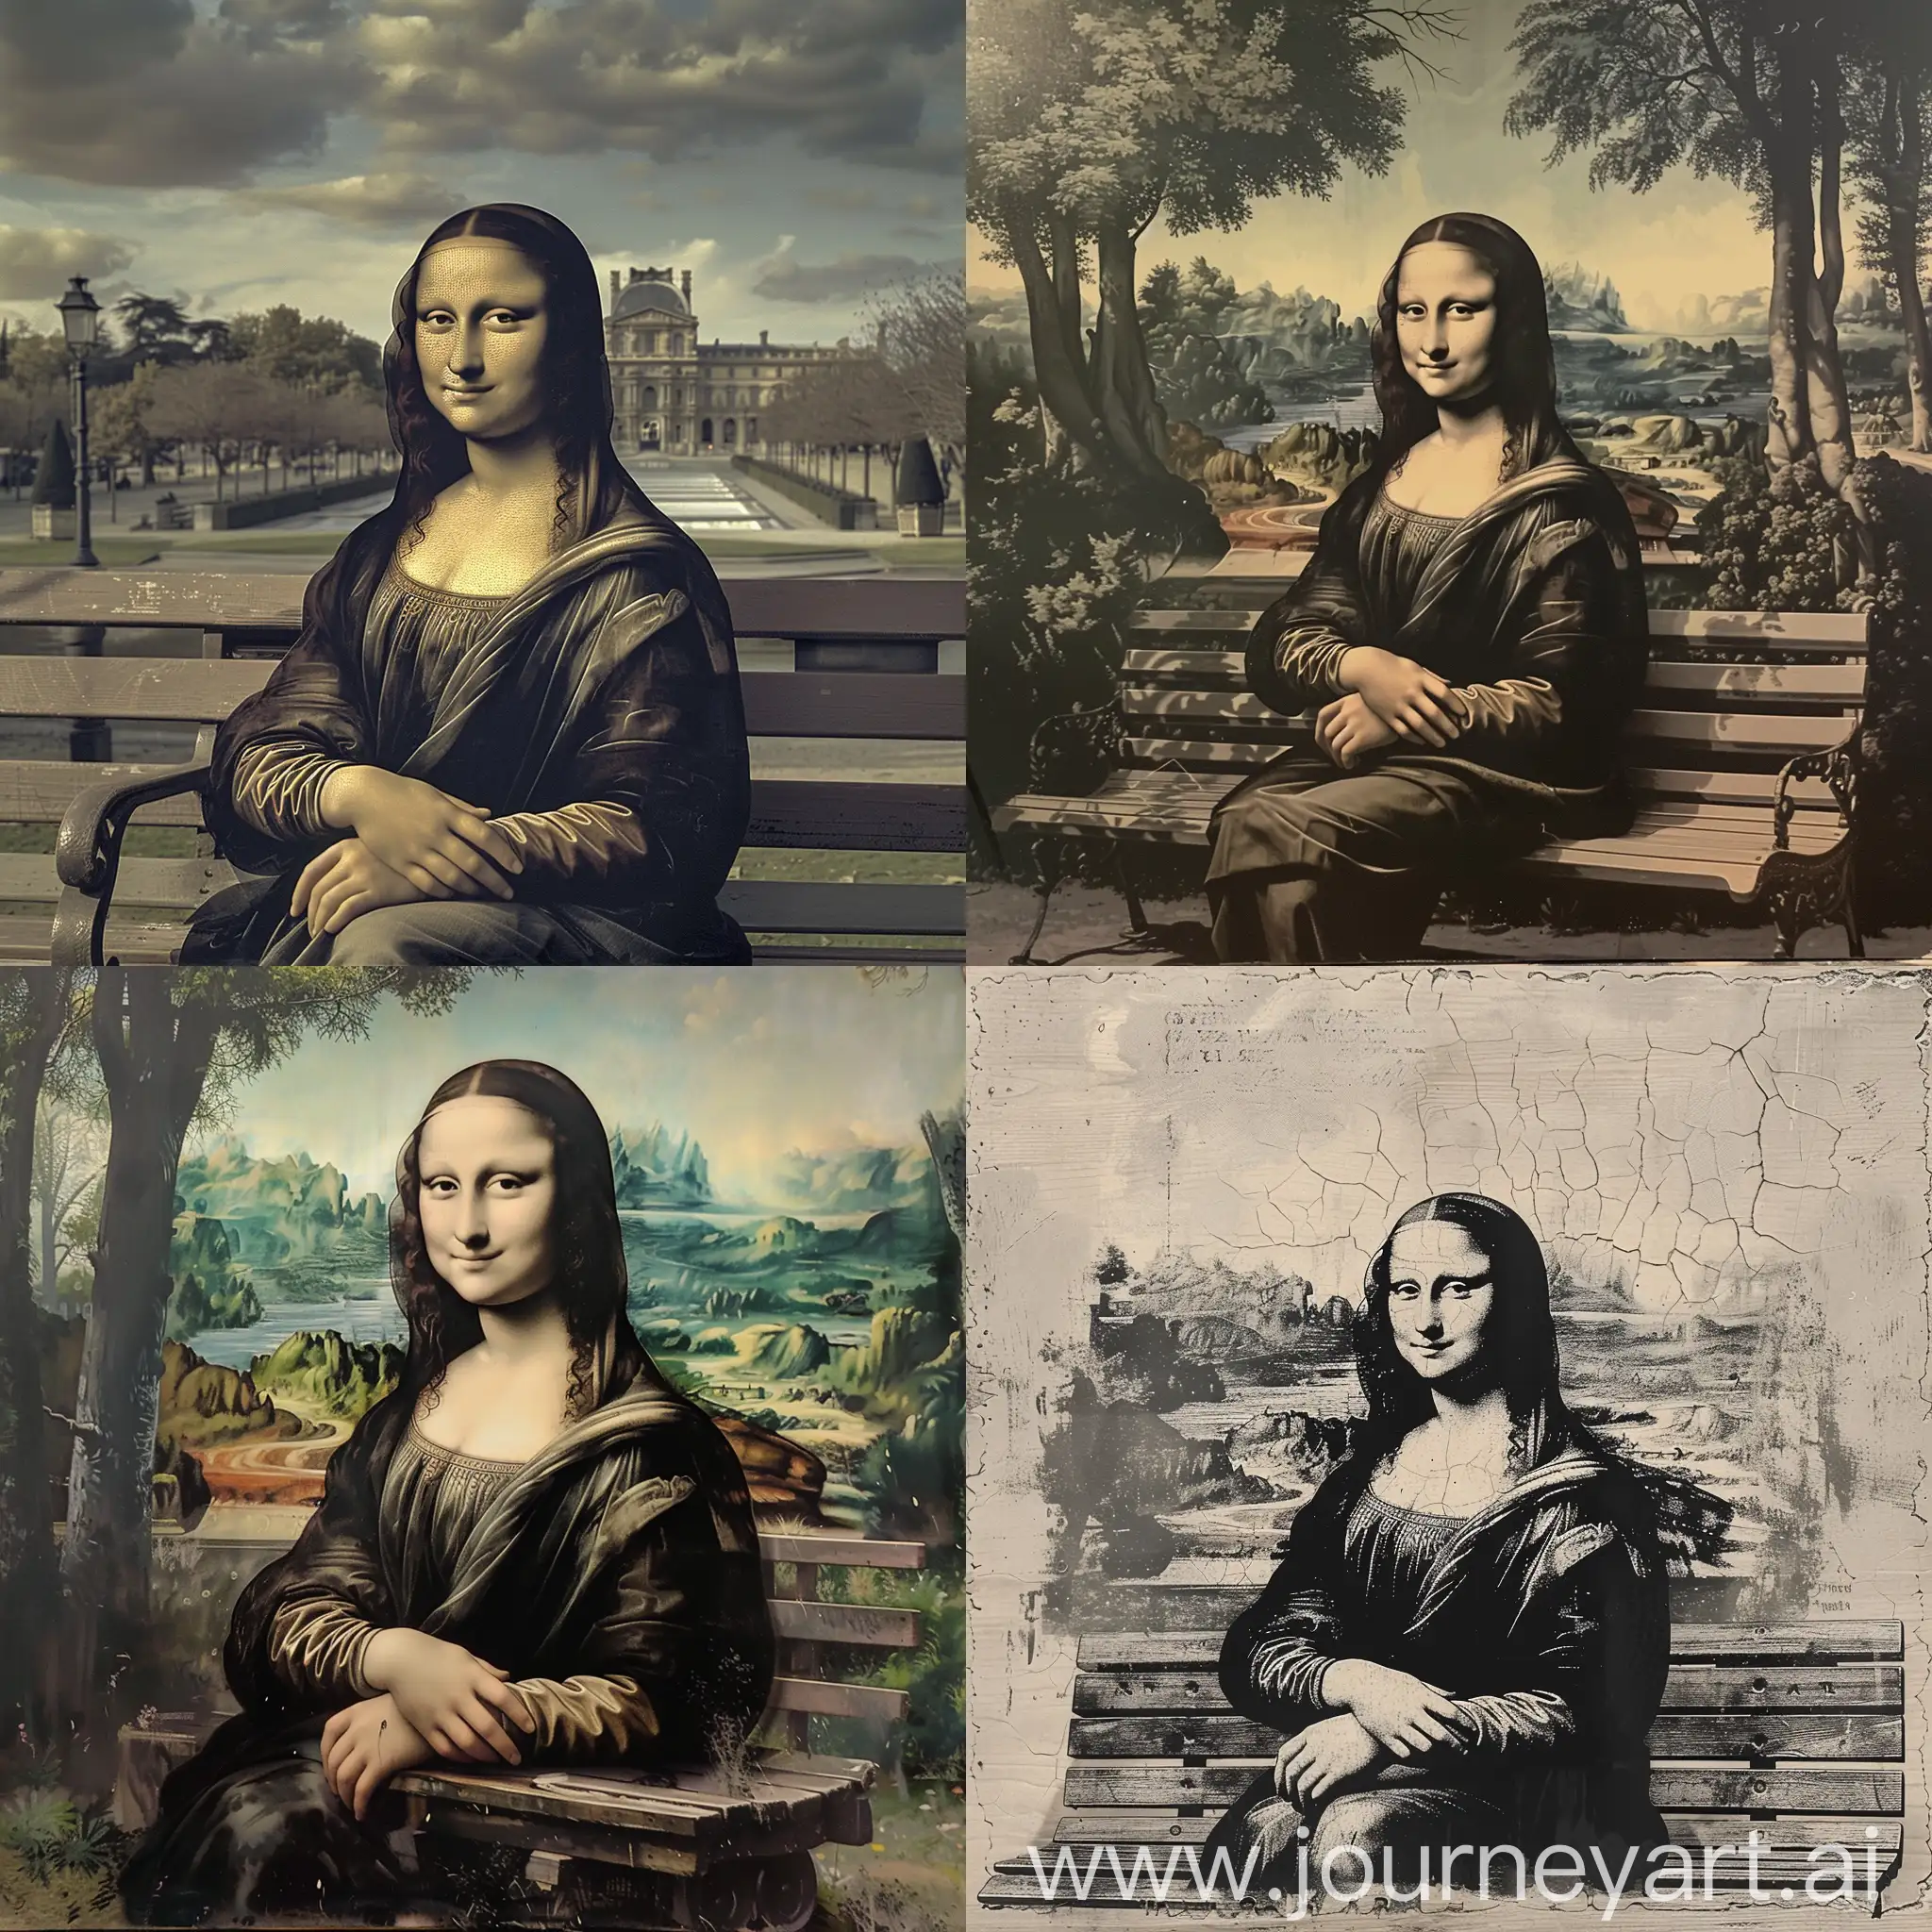 Mona Lisa freed from the walls of the Louvre on a park bench. Sitting elegantly. An enigmatic smile flashes.. The appearance of the Mona Lisa, which seems to travel through time, stimulates the imagination. It allows for various interpretations